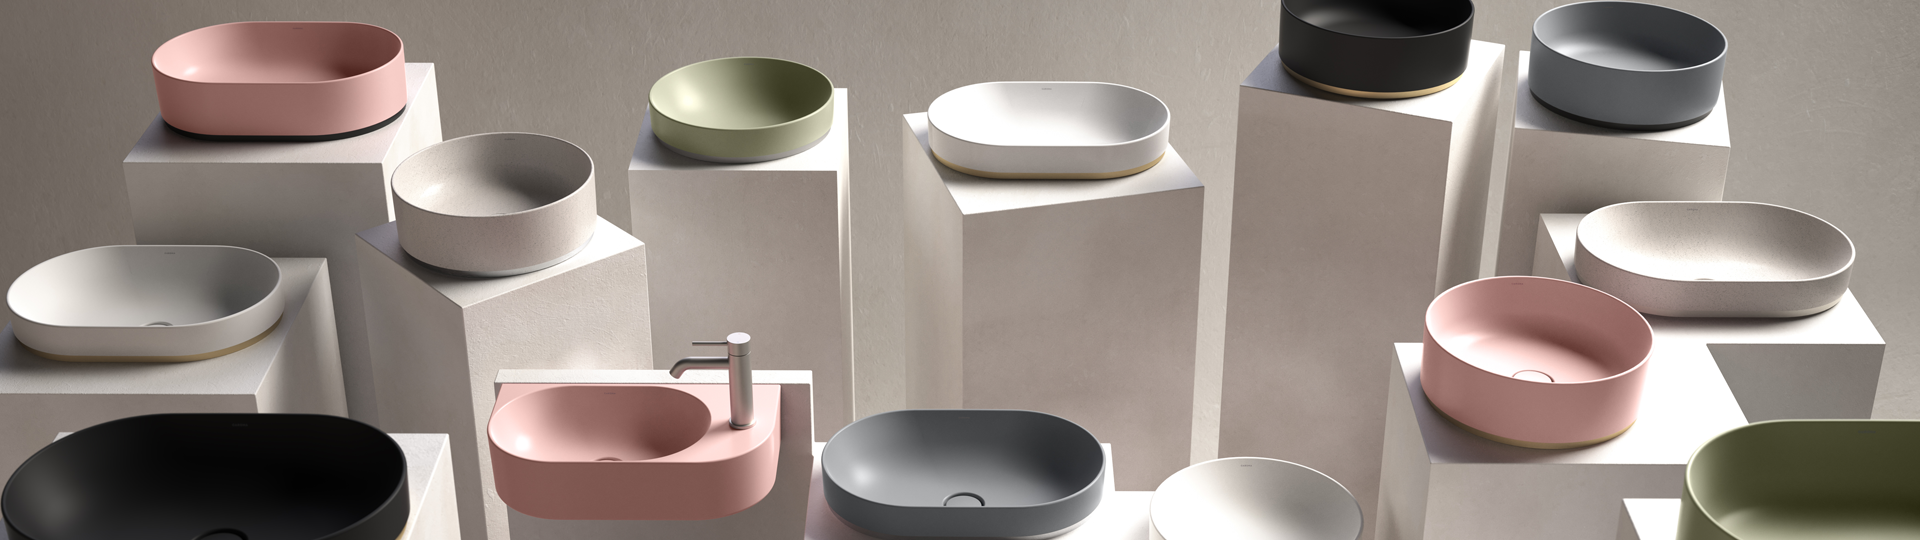 Selection of Caroma basins in various colours and shapes